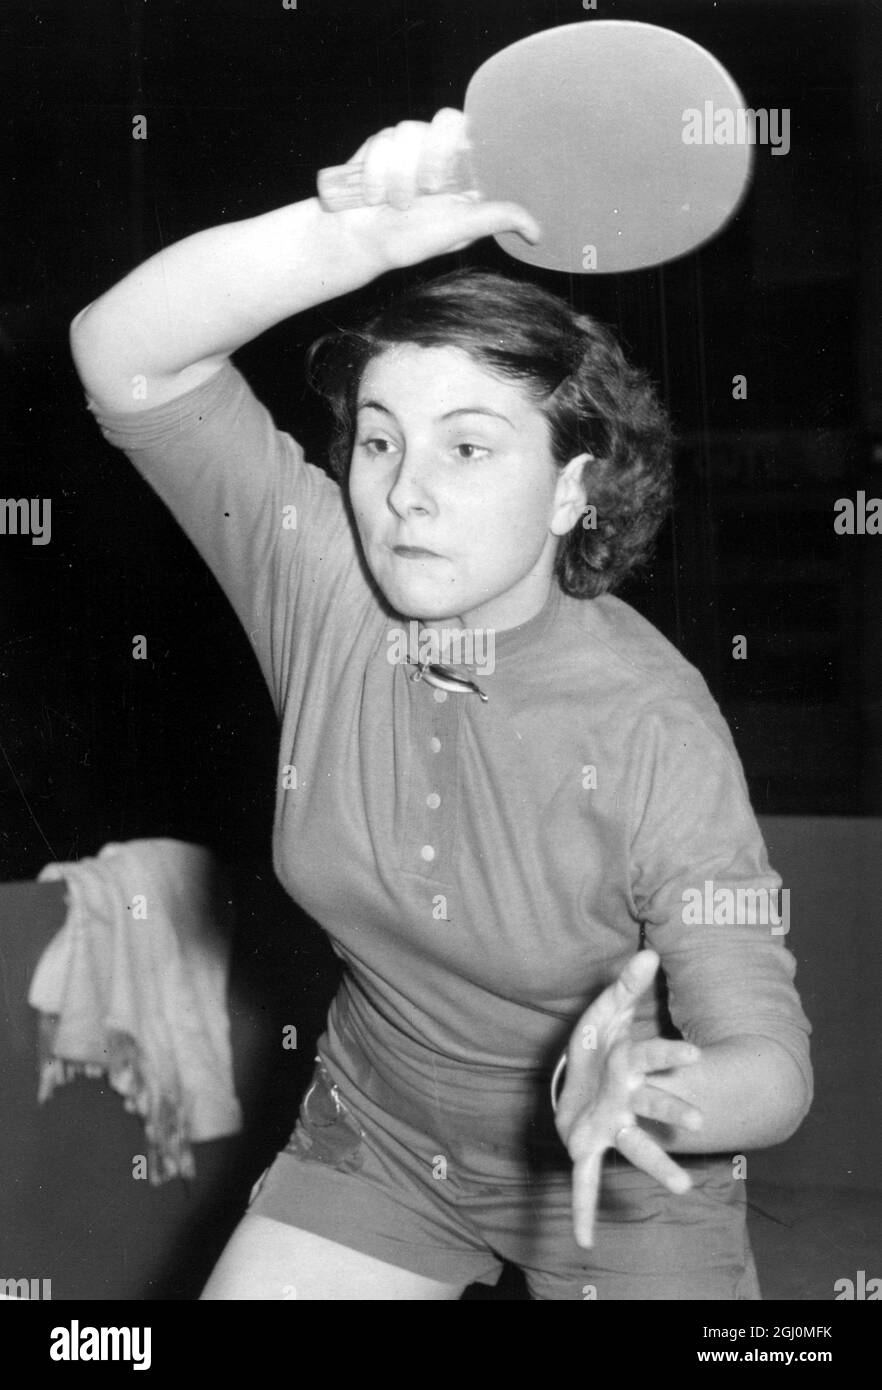 Miss J Koehnke , sister of Sharon Koehnke of Chicago USA reaches semi finals of Junior English Open Table Tennis Championships at Wembley Empire Pool . 28 March 1958 Stock Photo